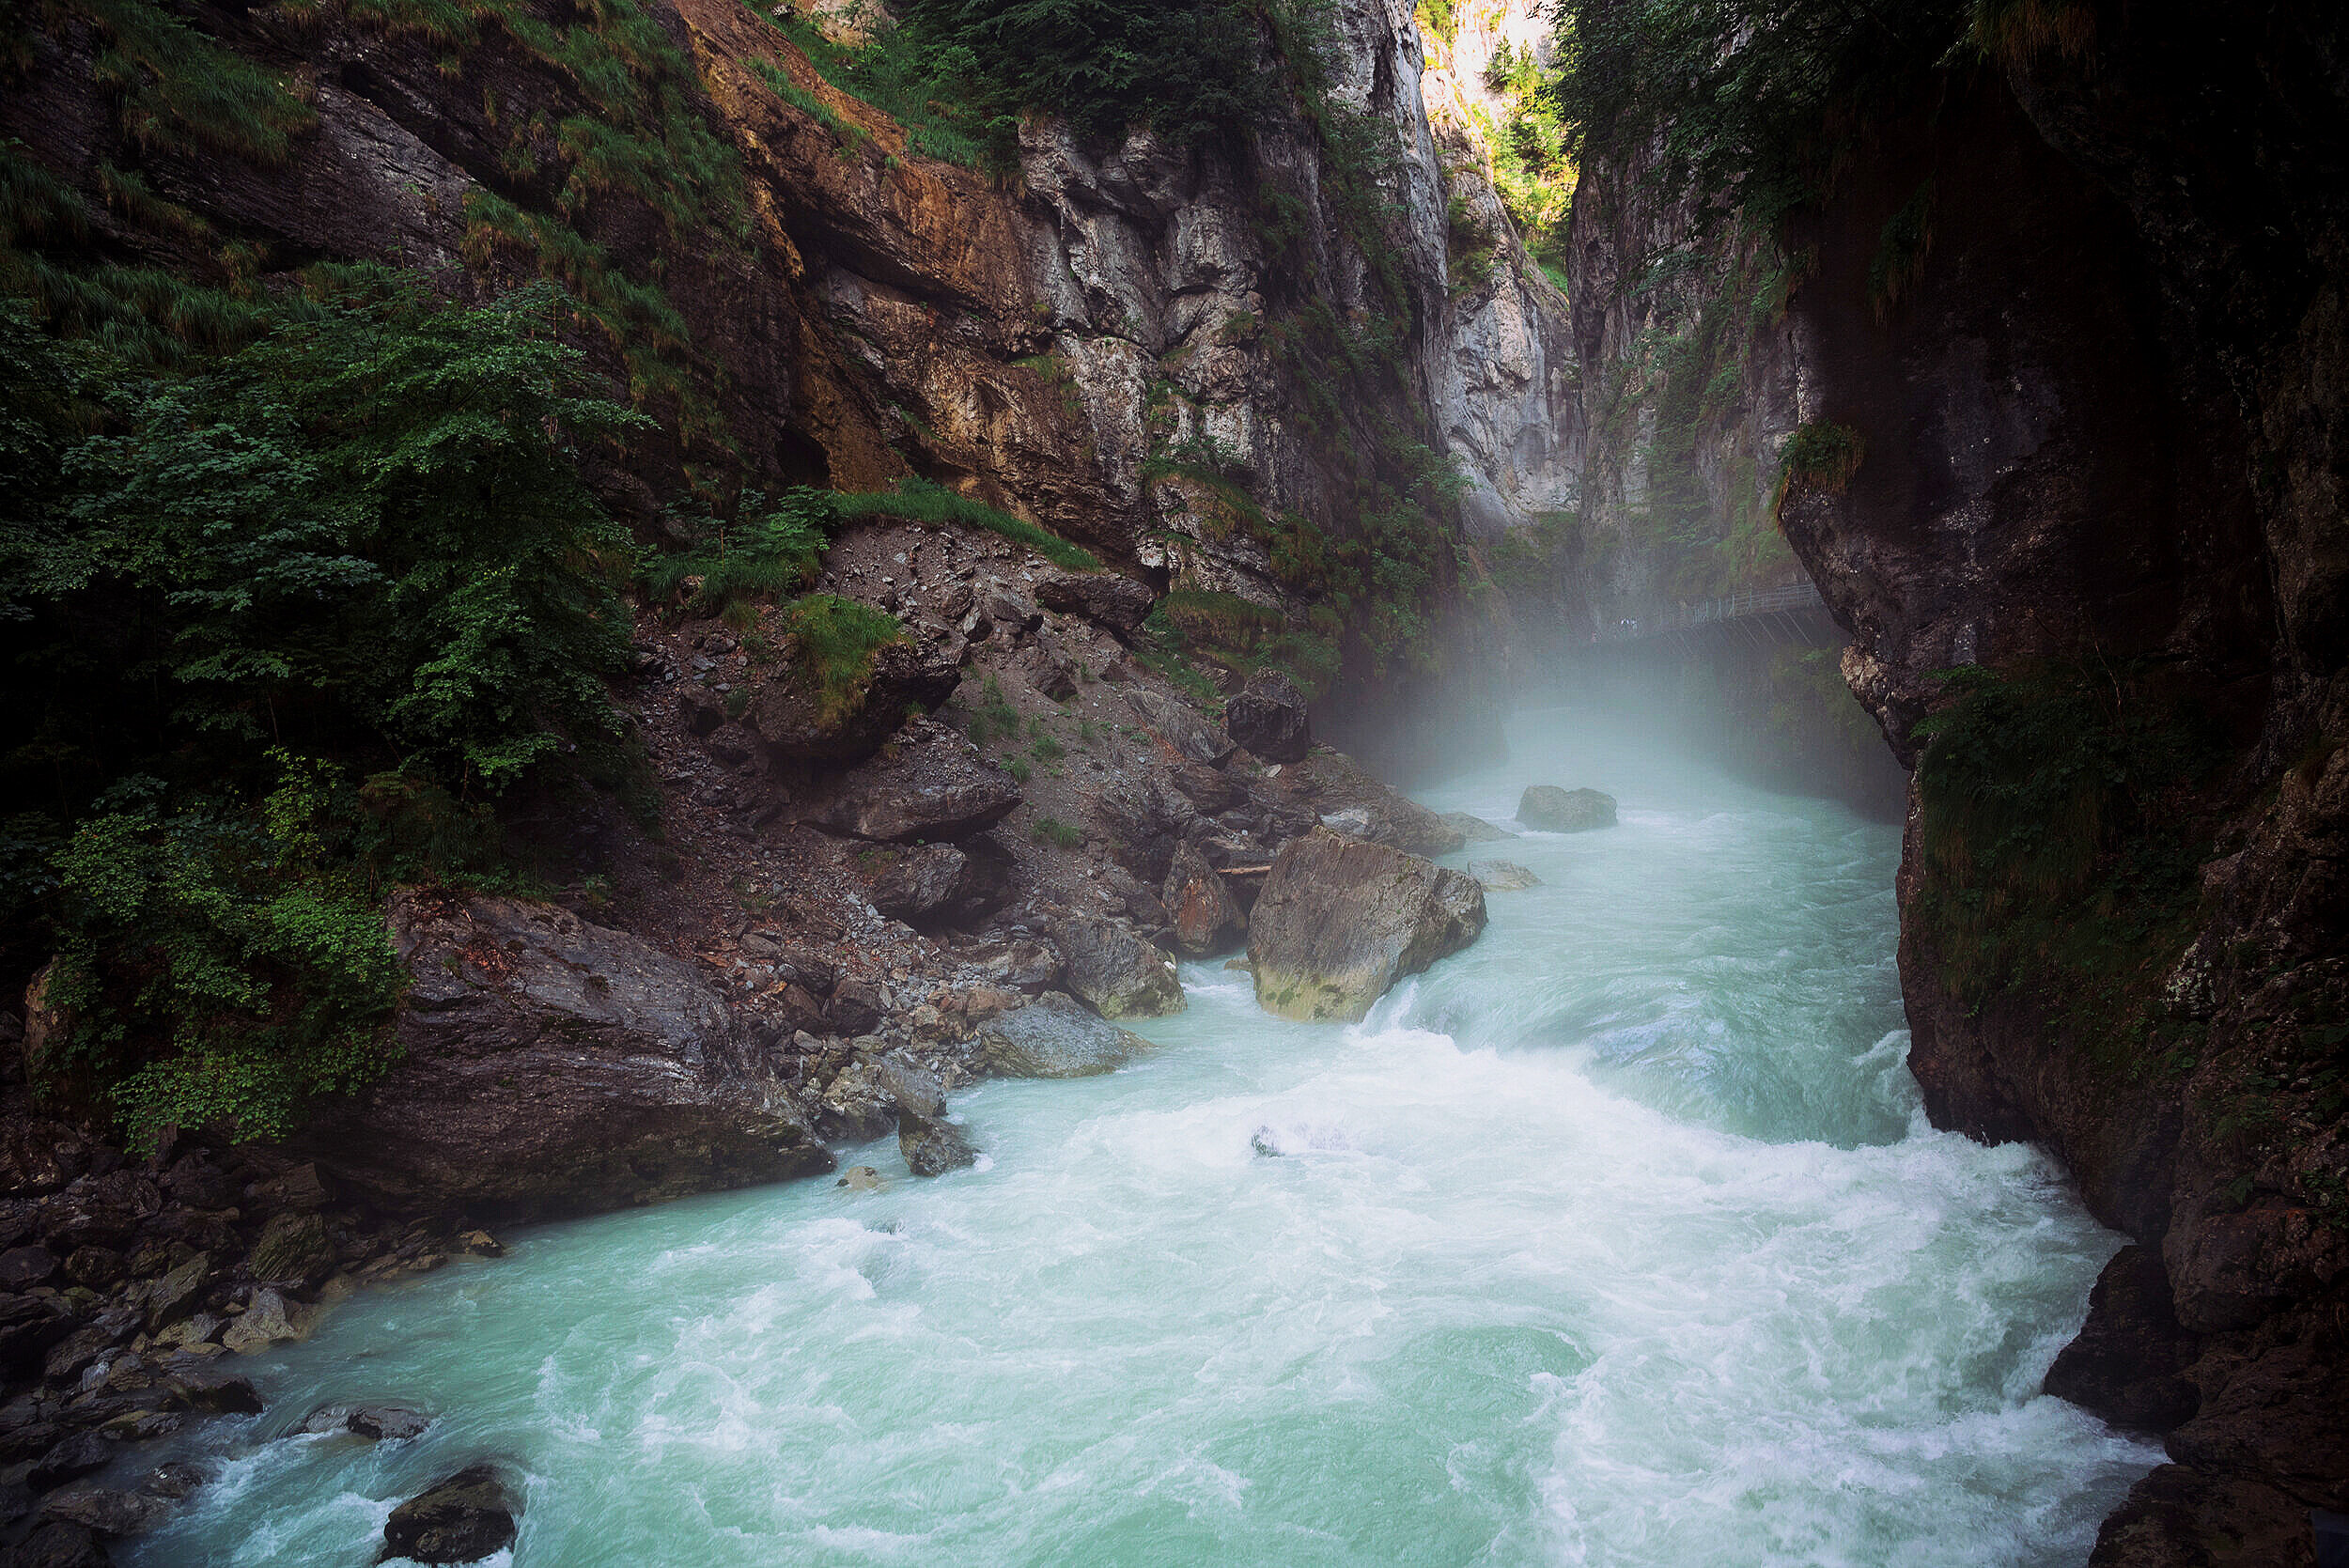 Inside the Aare Gorge